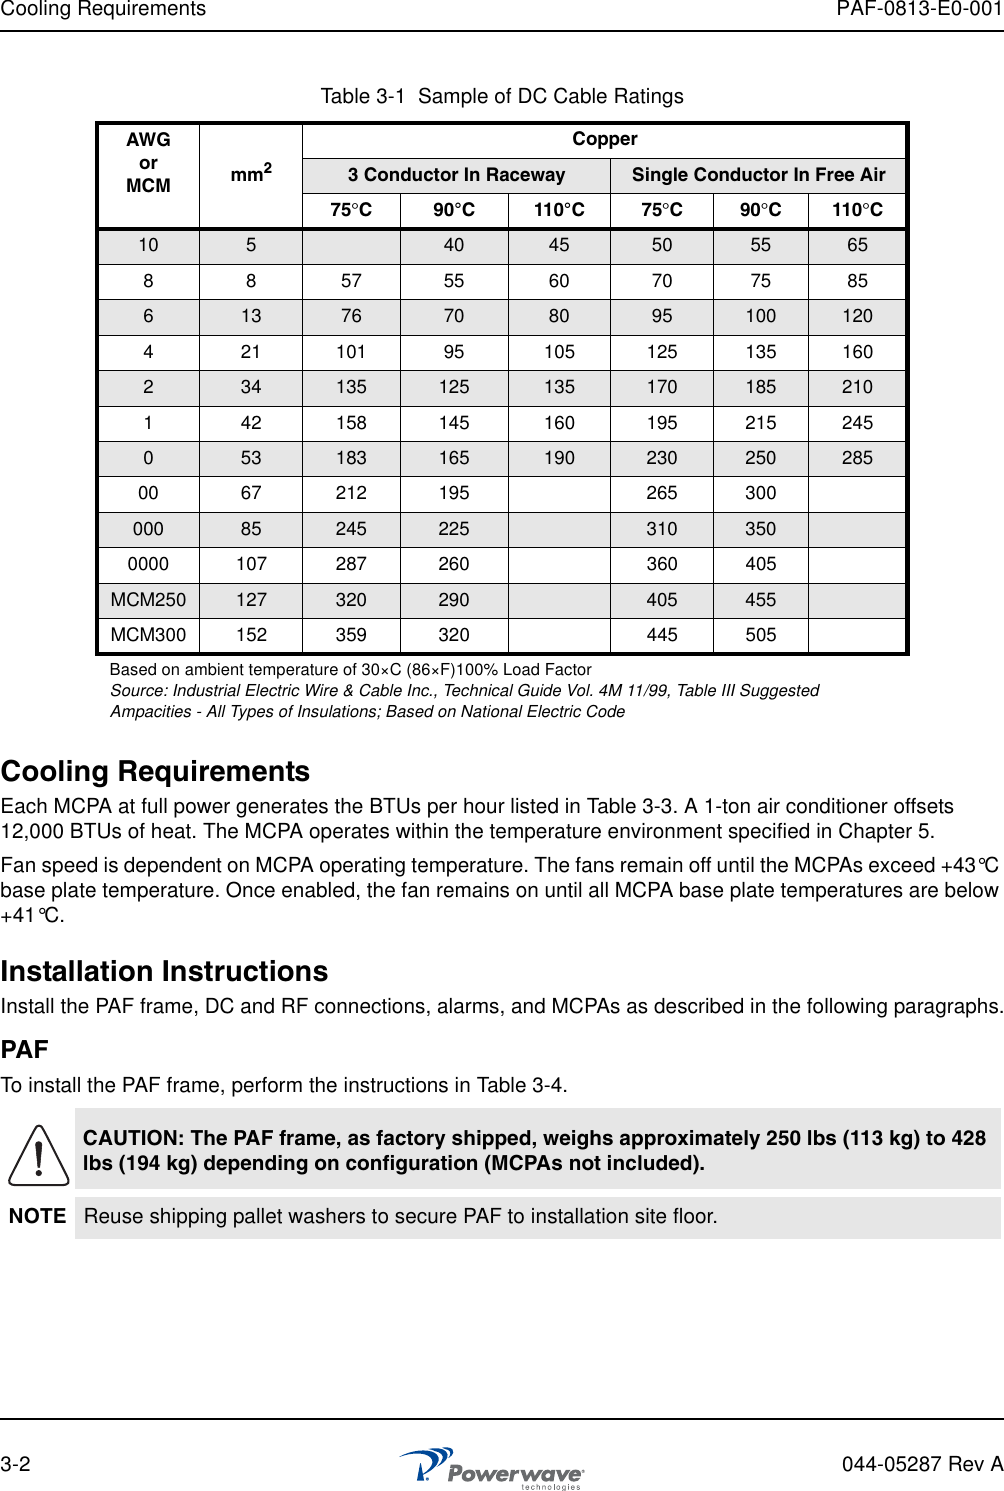 Cooling Requirements PAF-0813-E0-0013-2 044-05287 Rev ACooling RequirementsEach MCPA at full power generates the BTUs per hour listed in Table 3-3. A 1-ton air conditioner offsets 12,000 BTUs of heat. The MCPA operates within the temperature environment specified in Chapter 5.Fan speed is dependent on MCPA operating temperature. The fans remain off until the MCPAs exceed +43°C base plate temperature. Once enabled, the fan remains on until all MCPA base plate temperatures are below +41°C. Installation InstructionsInstall the PAF frame, DC and RF connections, alarms, and MCPAs as described in the following paragraphs.PAF To install the PAF frame, perform the instructions in Table 3-4.Table 3-1  Sample of DC Cable RatingsAWGorMCM mm2Copper3 Conductor In Raceway Single Conductor In Free Air75°C 90°C 110°C 75°C90°C110°C10 540 45 50 55 658 8 57 55 60 70 75 85613 76 70 80 95 100 1204 21 101 95 105 125 135 160234 135 125 135 170 185 2101 42 158 145 160 195 215 245053 183 165 190 230 250 28500 67 212 195 265 300000 85 245 225 310 3500000 107 287 260 360 405MCM250 127 320 290 405 455MCM300 152 359 320 445 505Based on ambient temperature of 30×C (86×F)100% Load Factor Source: Industrial Electric Wire &amp; Cable Inc., Technical Guide Vol. 4M 11/99, Table III Suggested Ampacities - All Types of Insulations; Based on National Electric CodeCAUTION: The PAF frame, as factory shipped, weighs approximately 250 lbs (113 kg) to 428 lbs (194 kg) depending on configuration (MCPAs not included).NOTE Reuse shipping pallet washers to secure PAF to installation site floor.